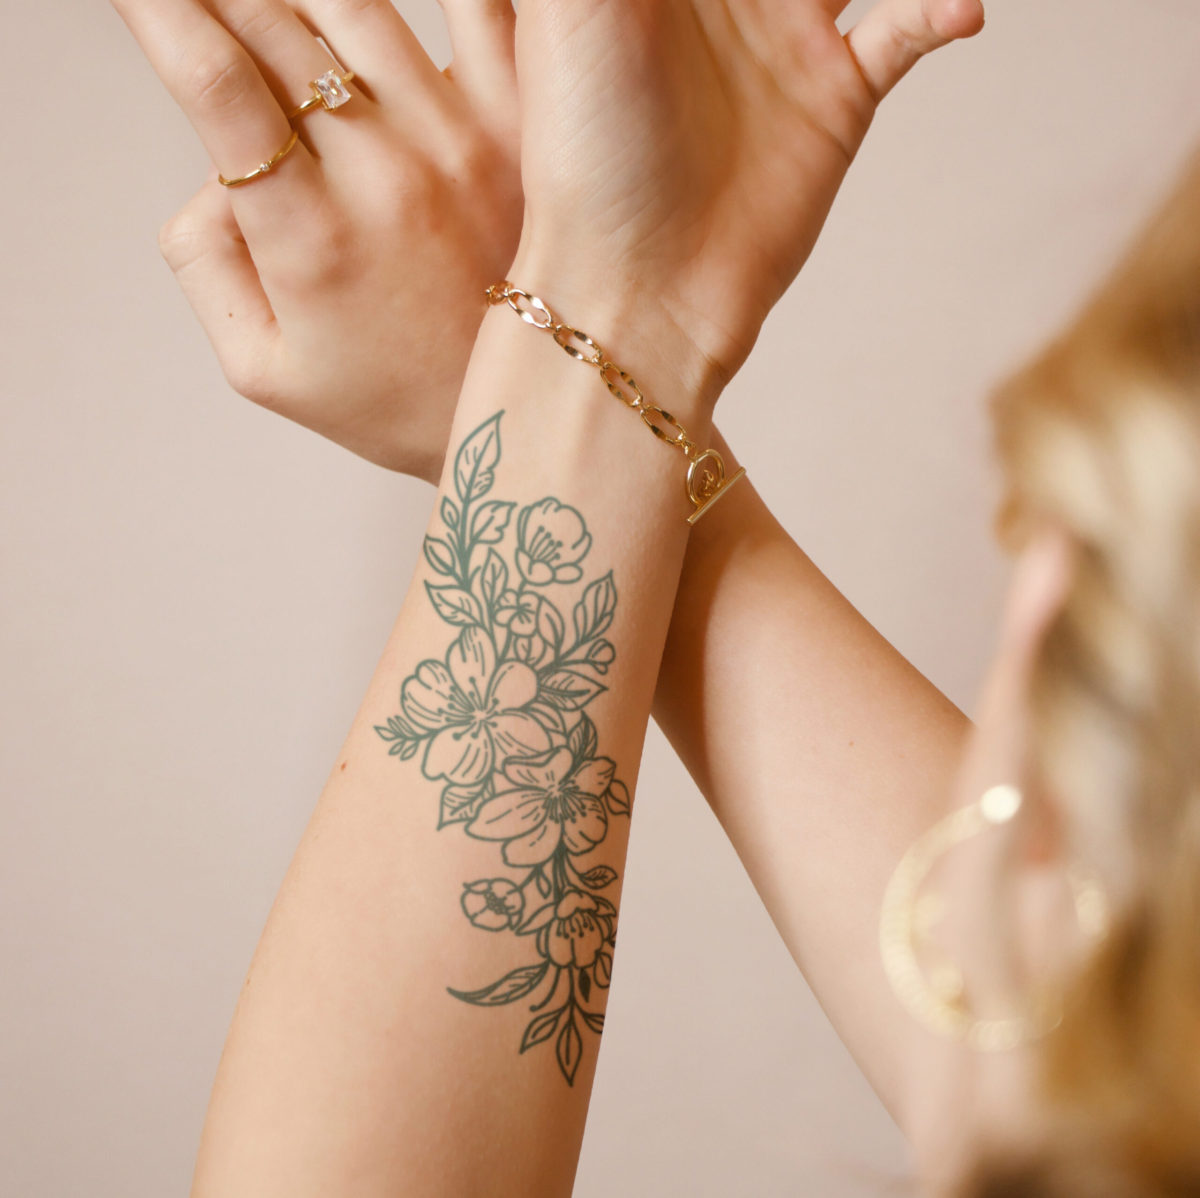 Beautiful Sleeve Tattoos That Outshine Your Wardrobe